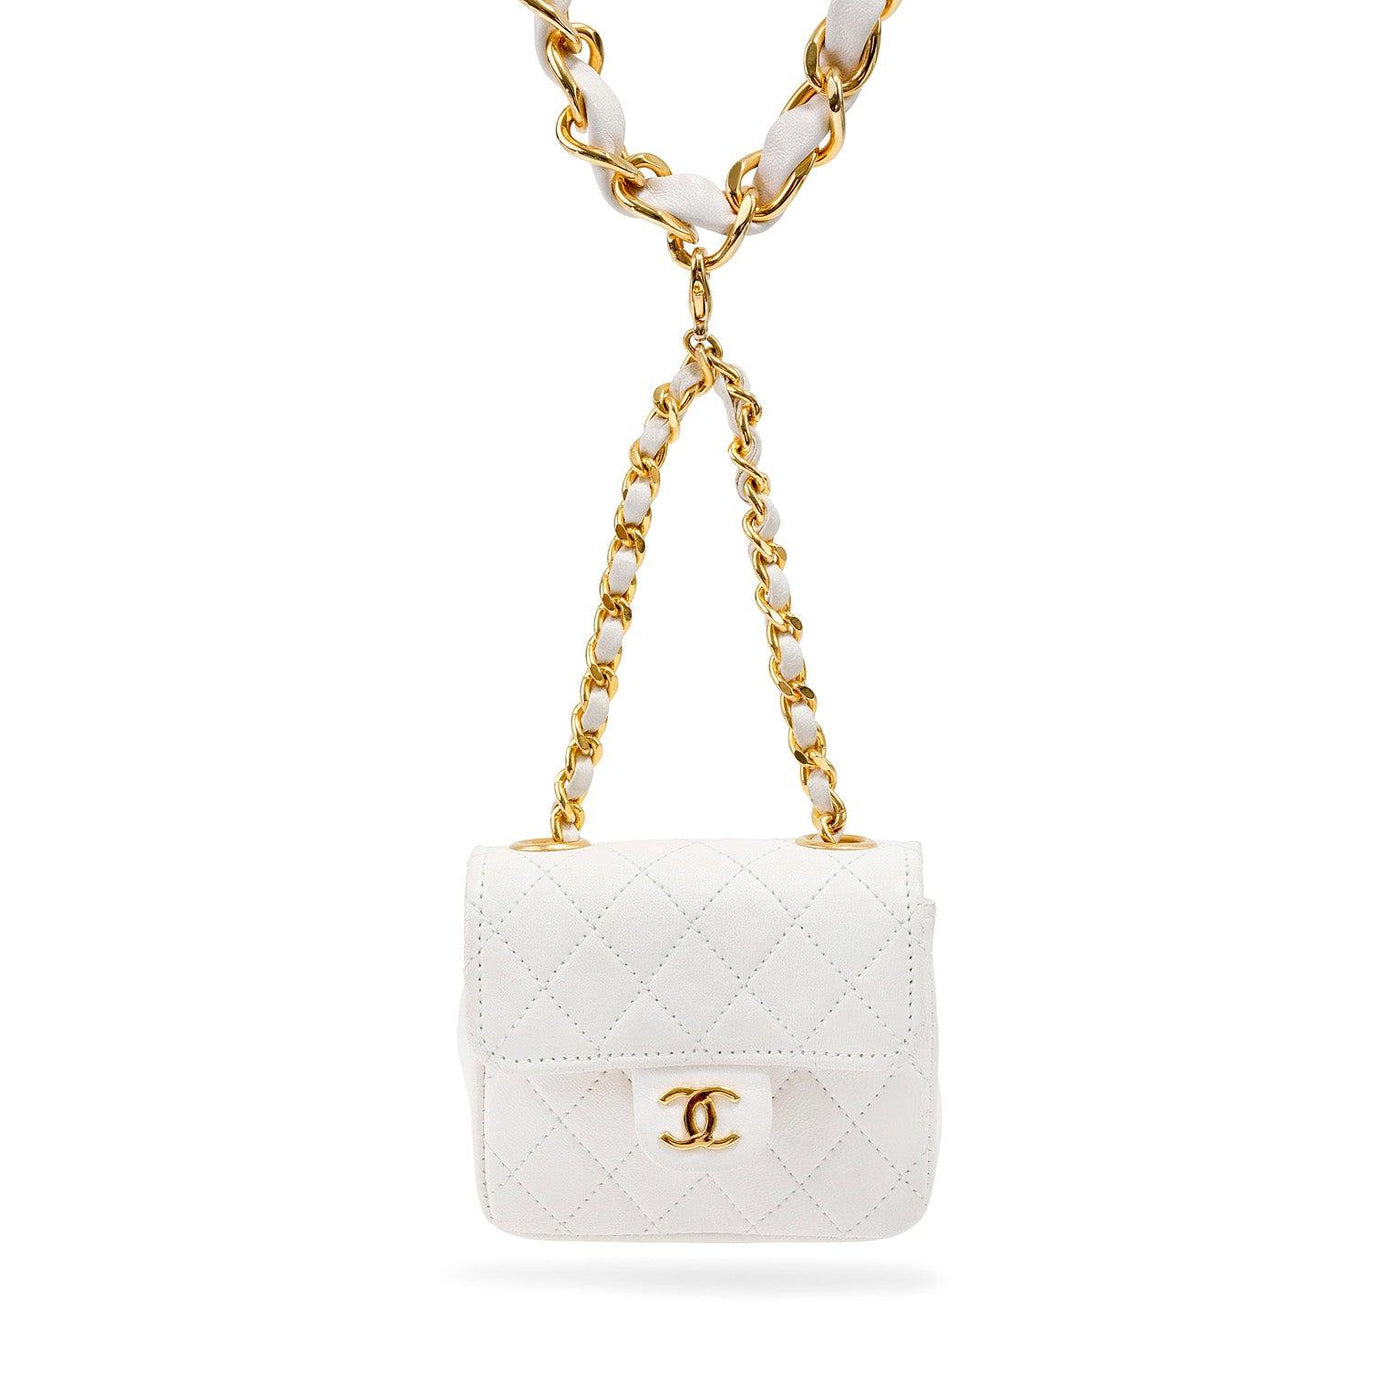 Chanel White Lambskin Micro Bag Chain Belt - Only Authentics